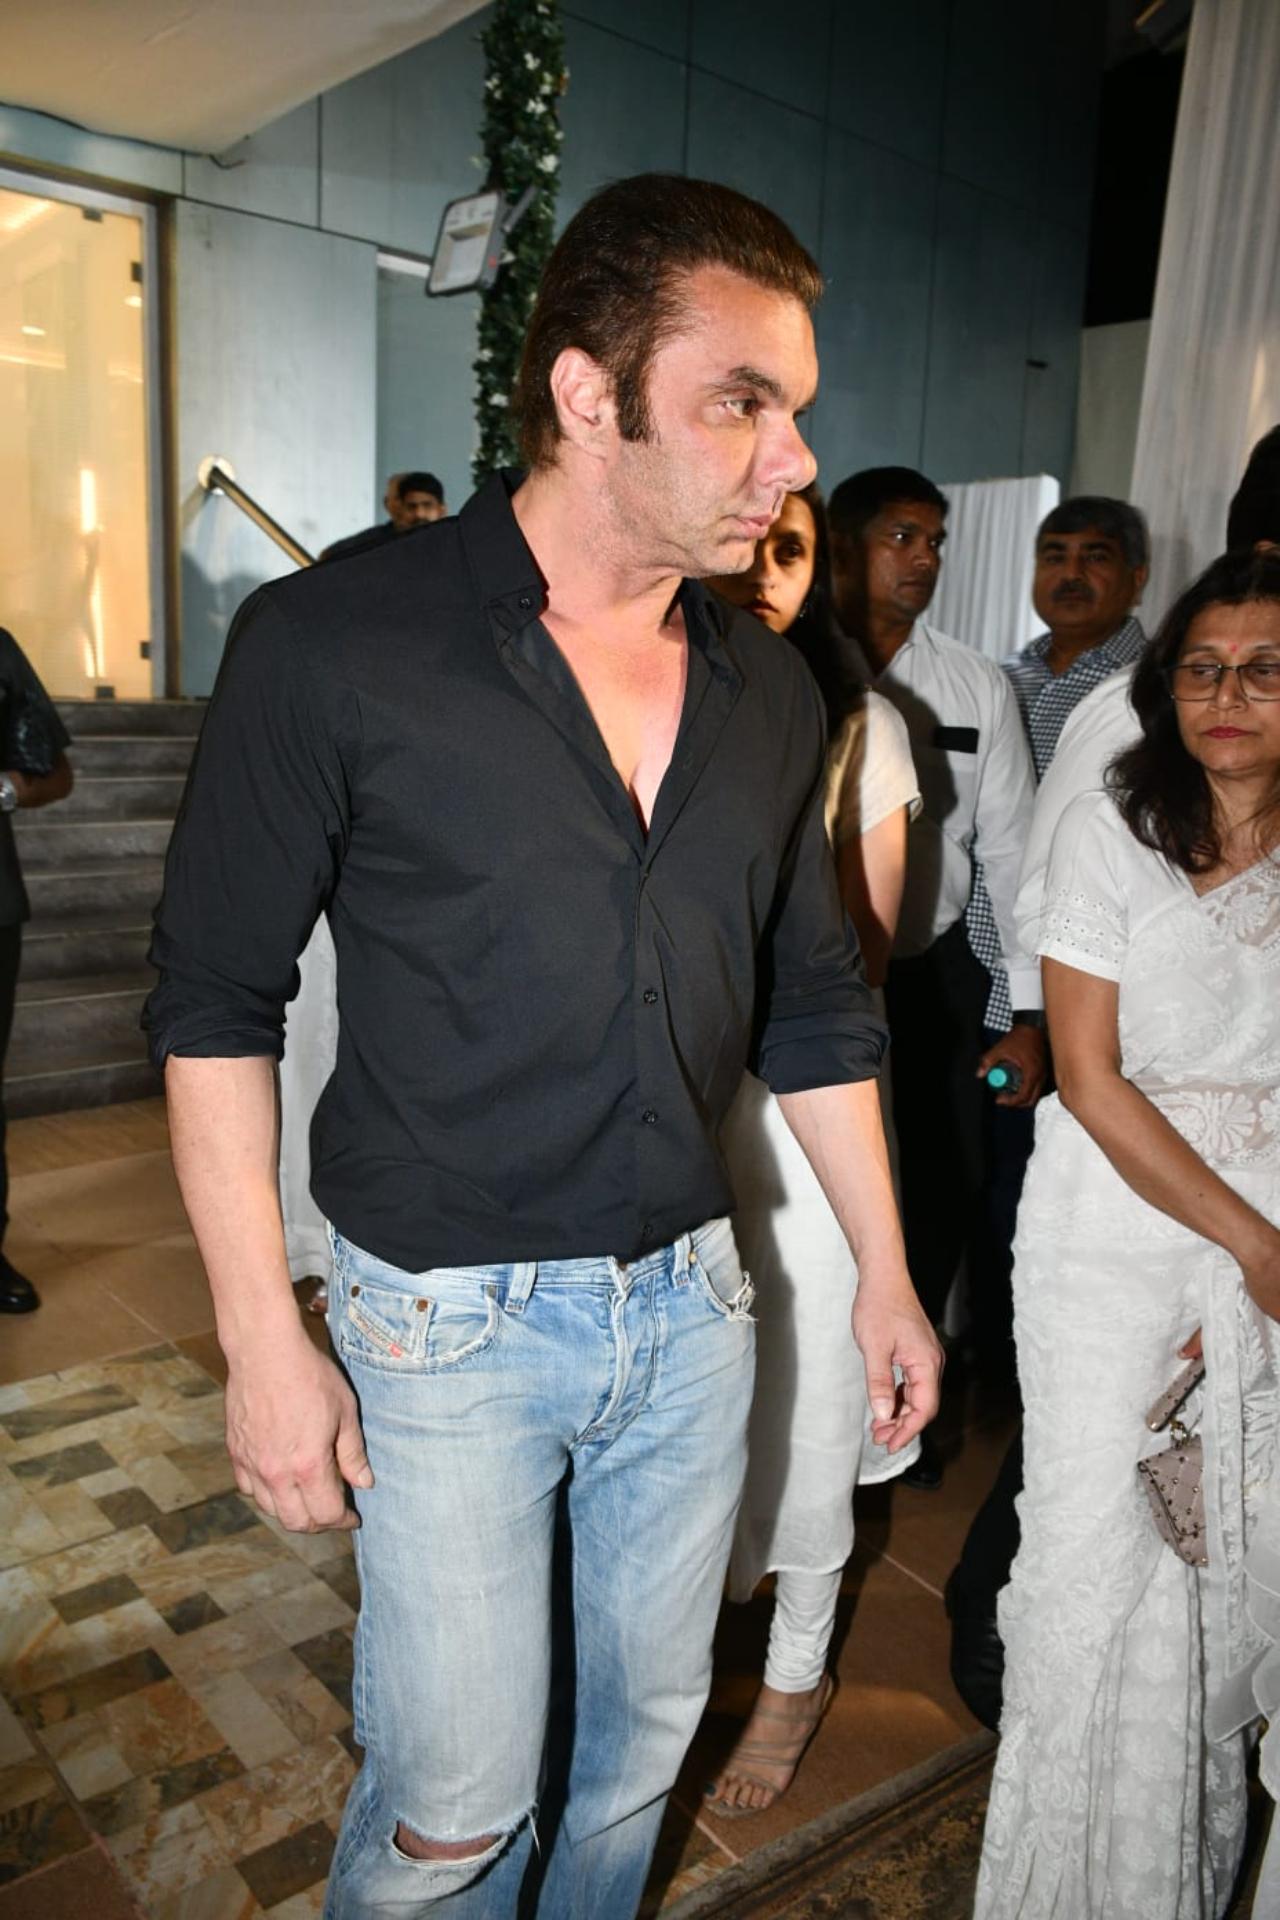 Sohail Khan was seen arriving in a black shirt and blue jeans